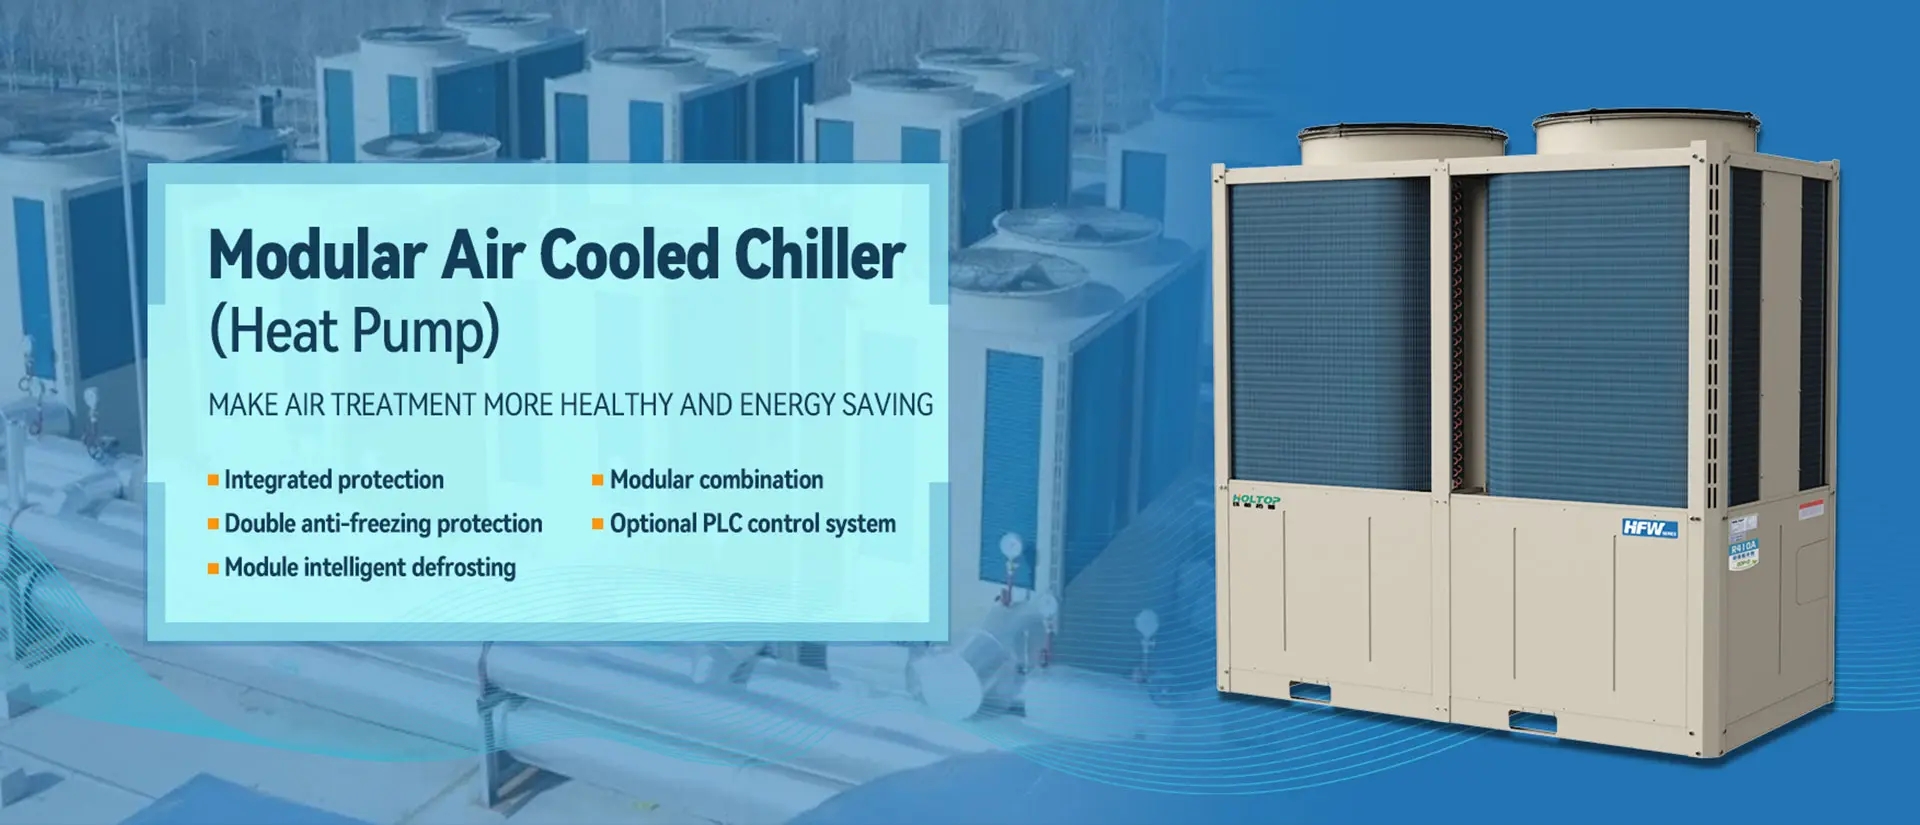 Holtop_air_cooled_chiller_heat_pump